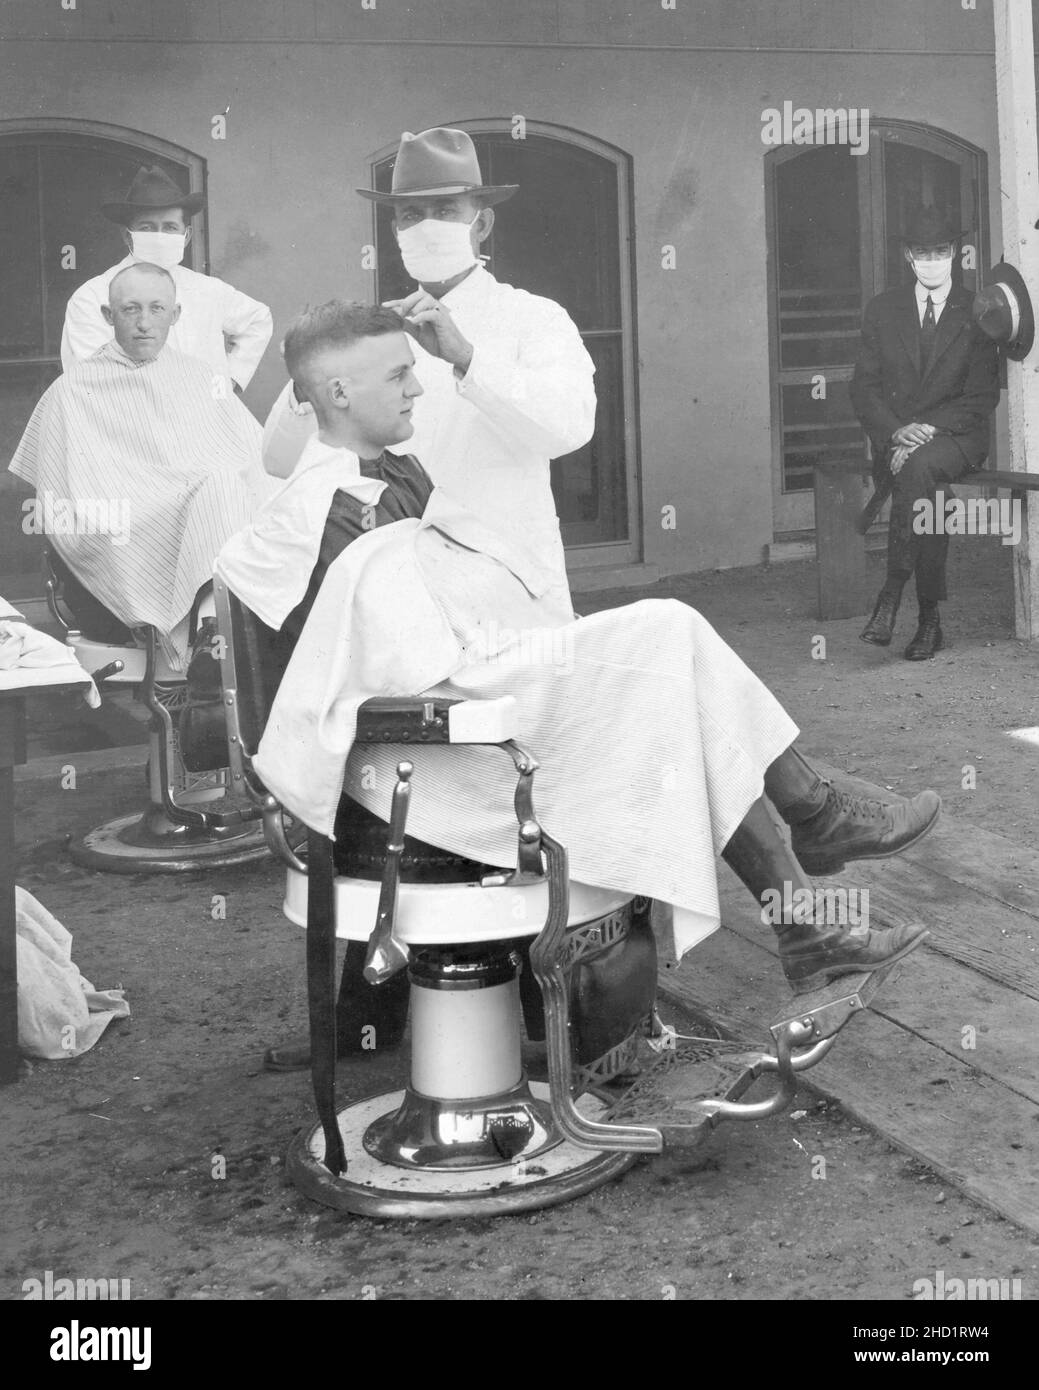 Vintage Photography - Mask wearing during the Spanish Flu pandemic of 1918 - Open air barber shop with customers having their hair cut. Stock Photo